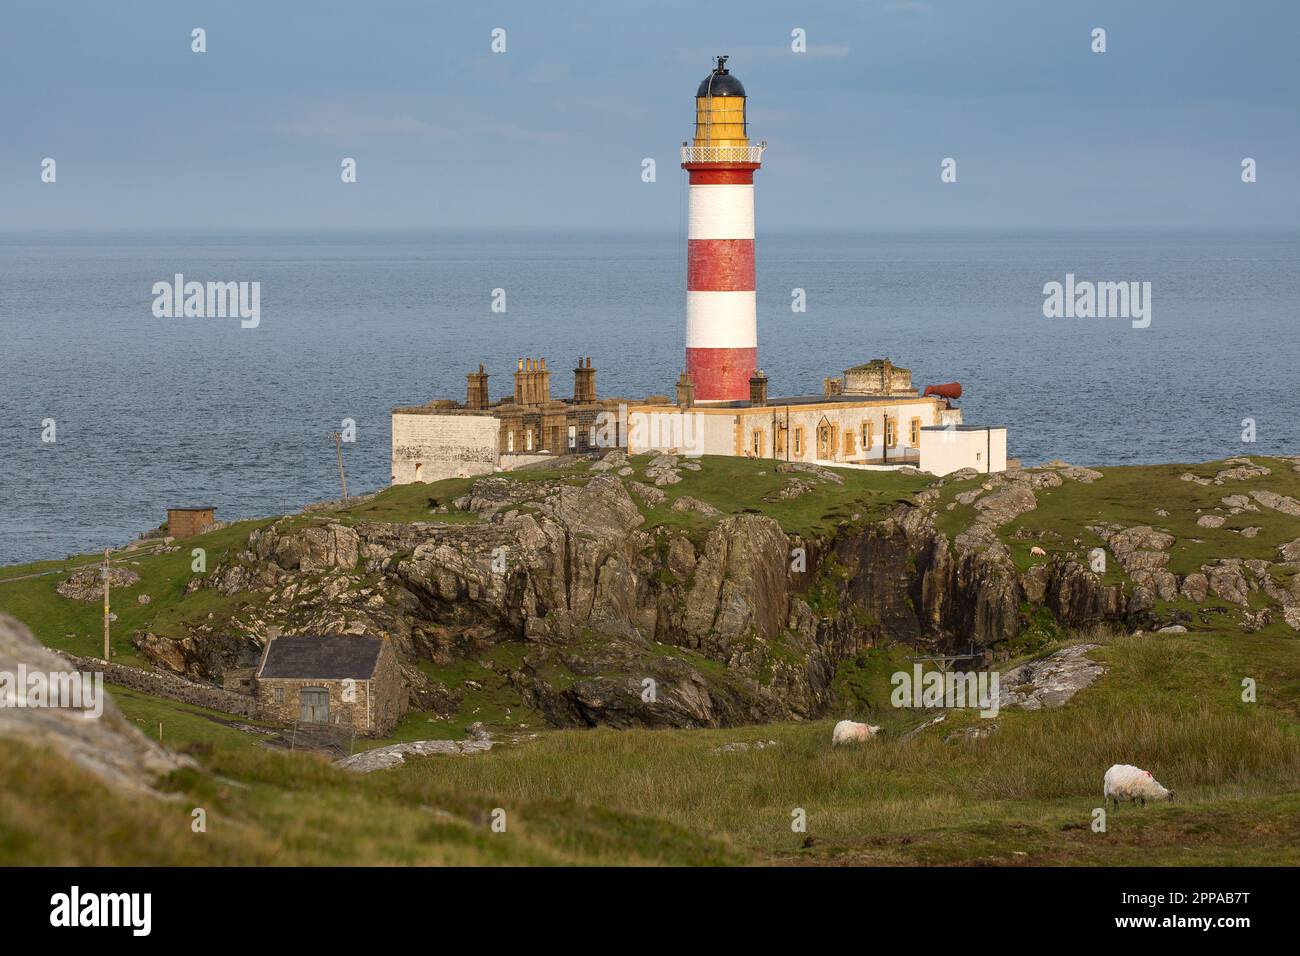 Eilean Glas Lighthouse and Lightkeepers' Houses, Scalpay of Harris, Hebrides, Outer Hebrides, Western Isles, Scotland, United Kingdom Stock Photo